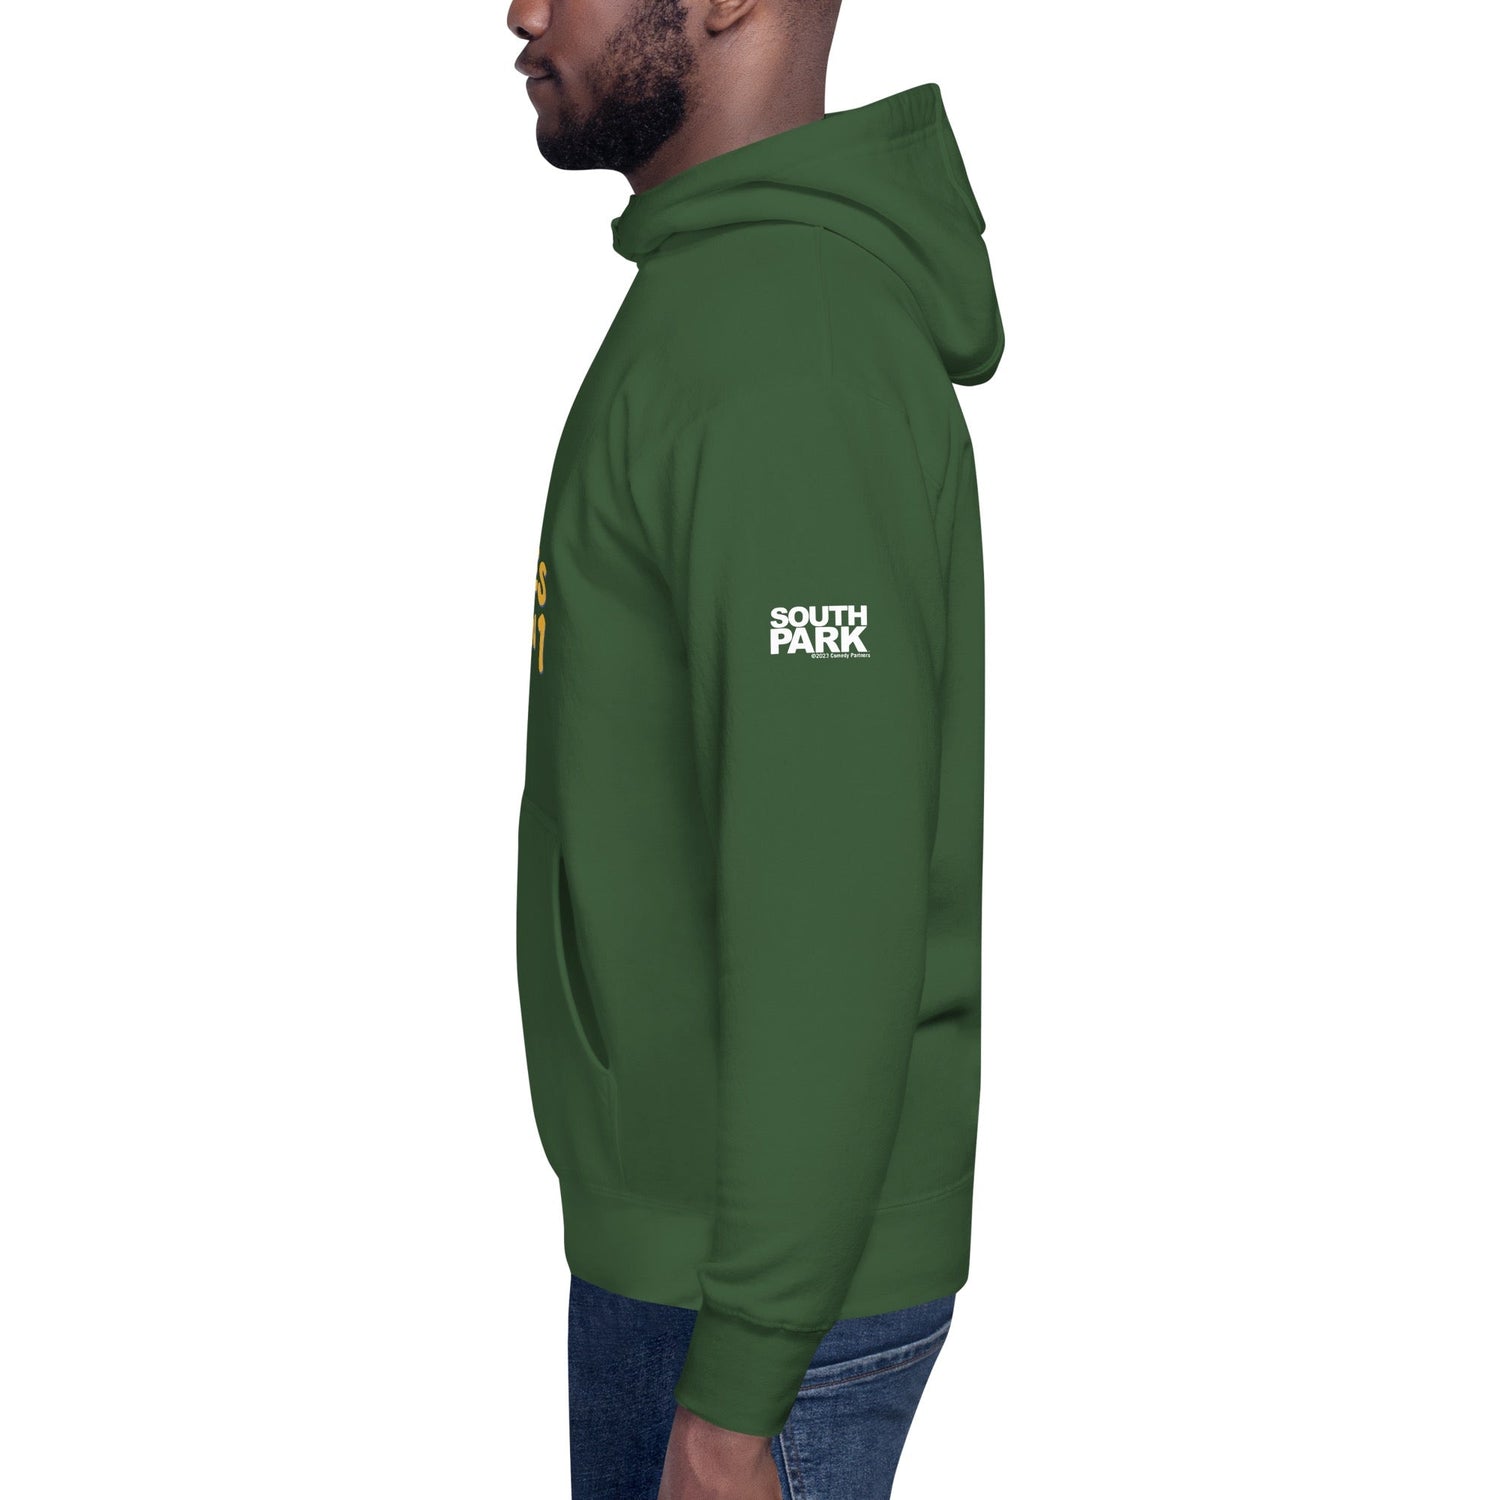 South Park 2 Valentine's Is Better Than 1 Adult Premium Hoodie - Paramount Shop